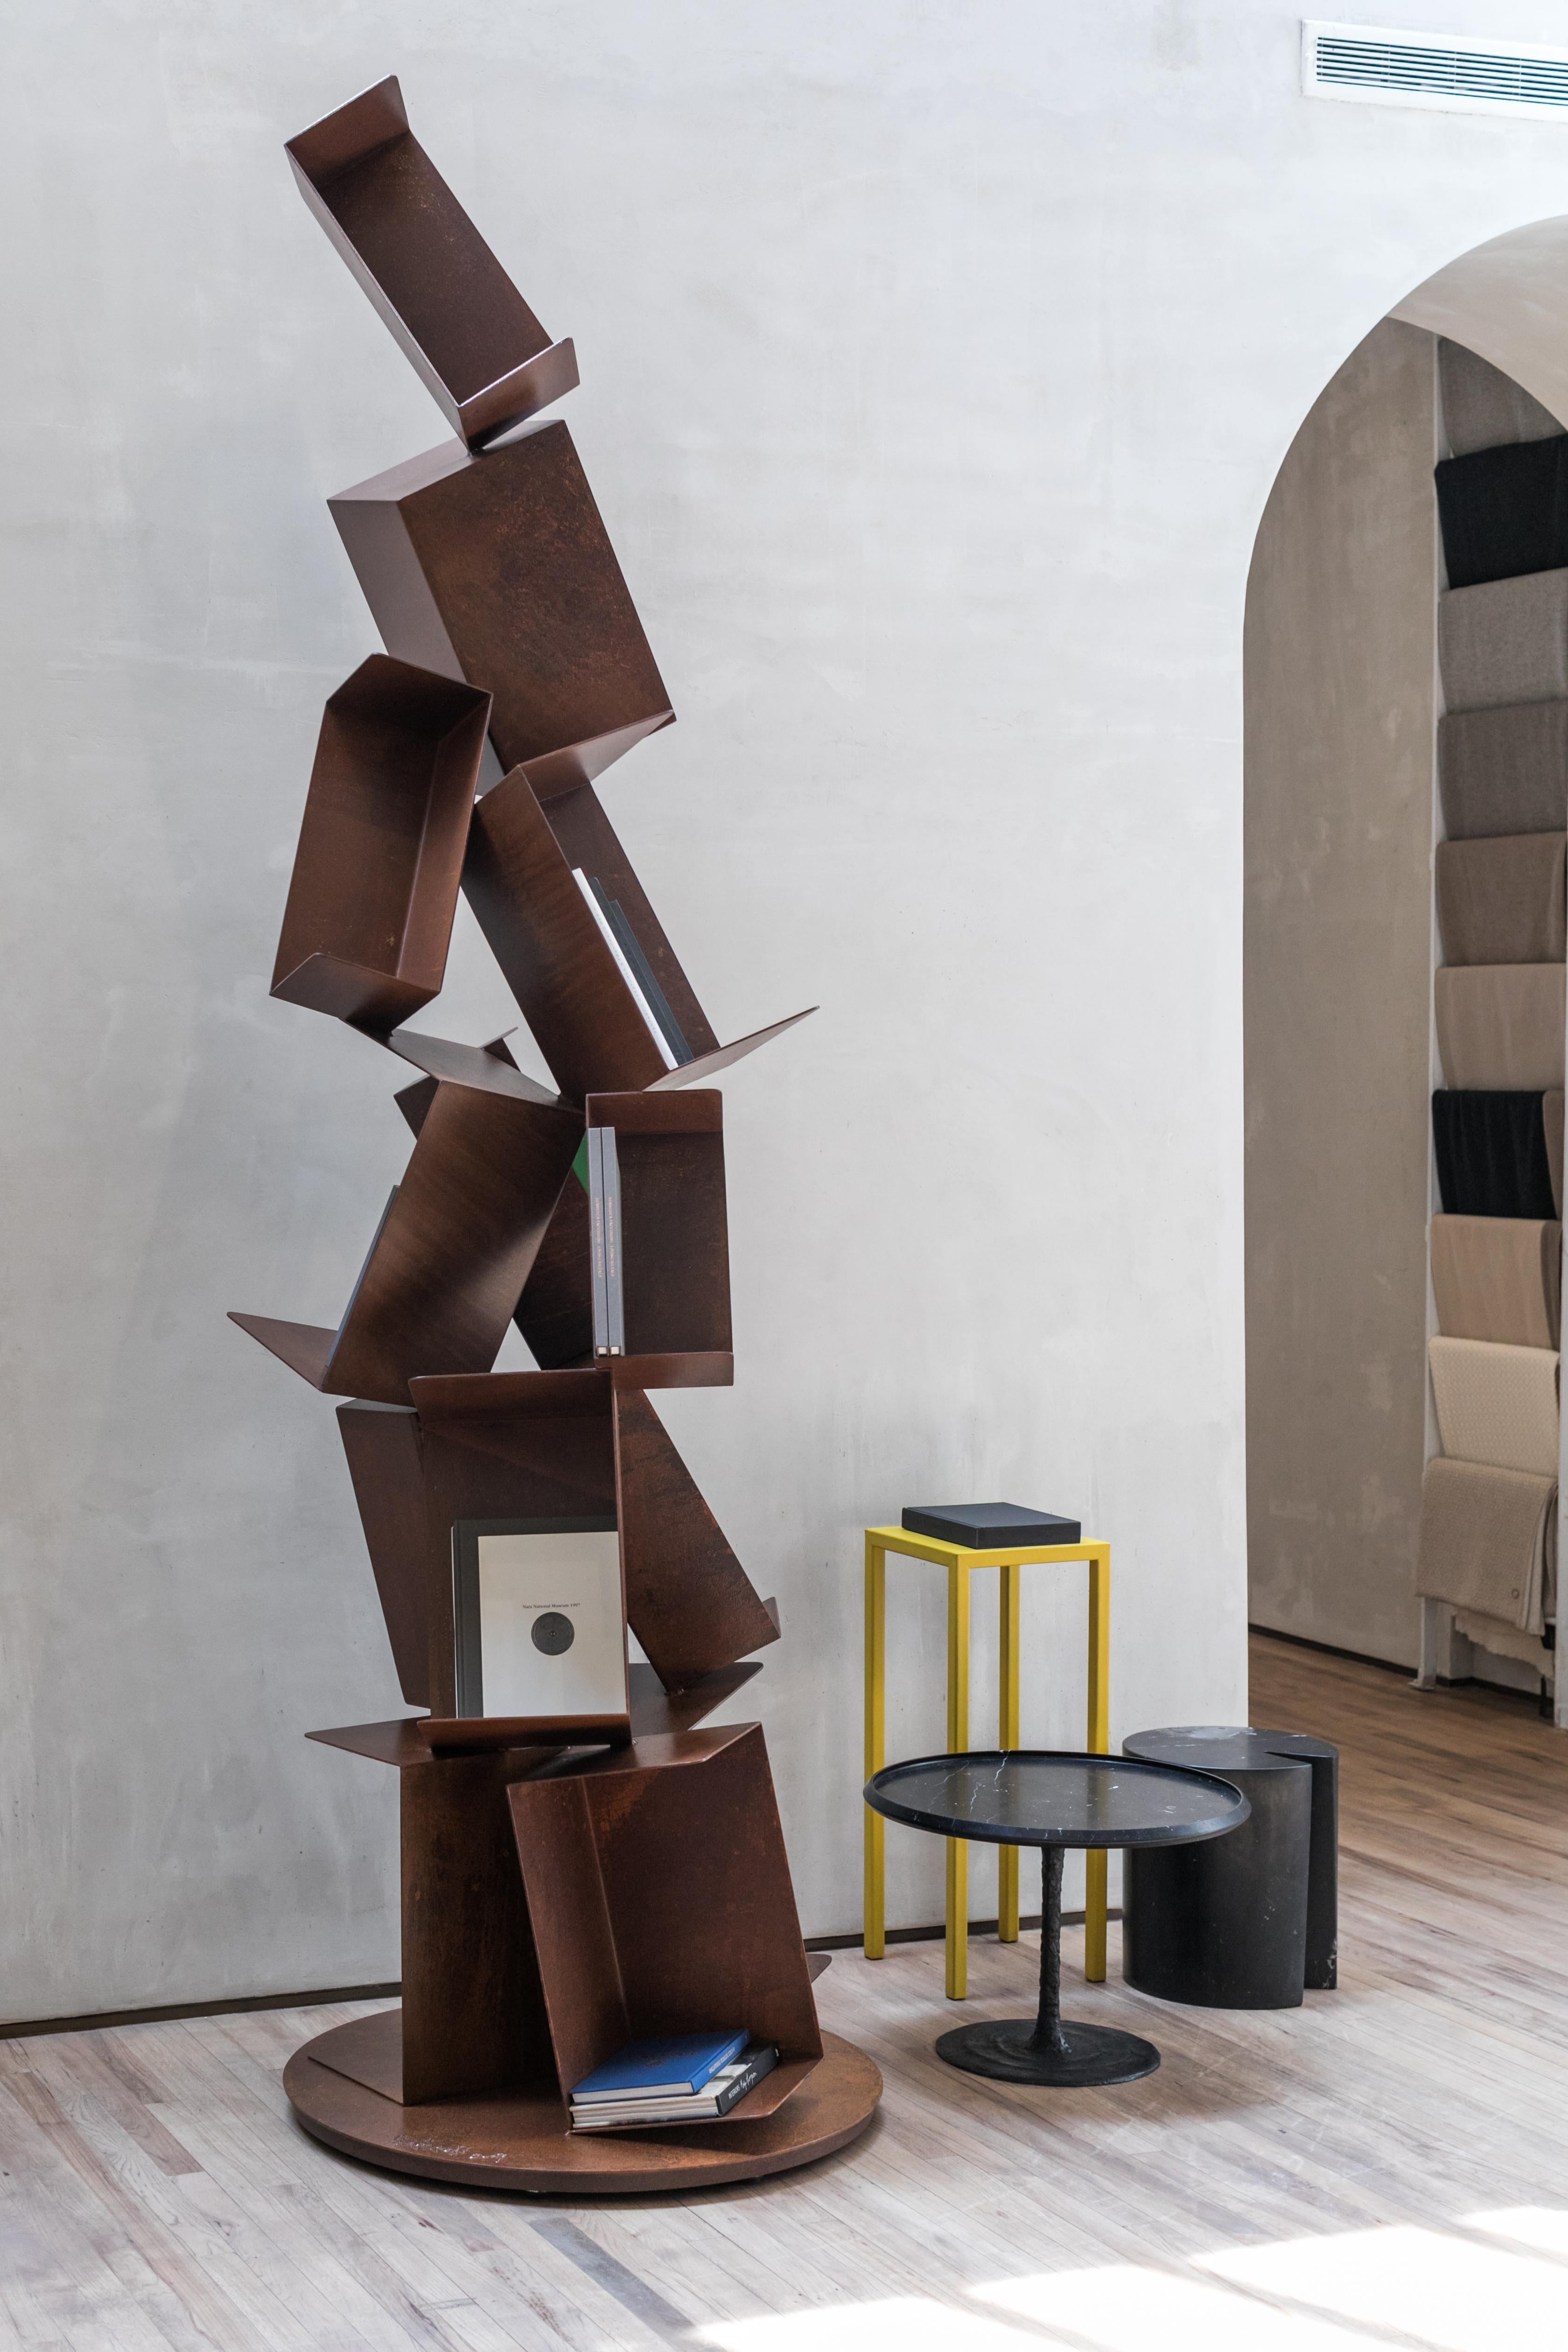 Collapse Bookcase Small by Gianluca Pacchioni im Zustand „Neu“ im Angebot in New York, NY